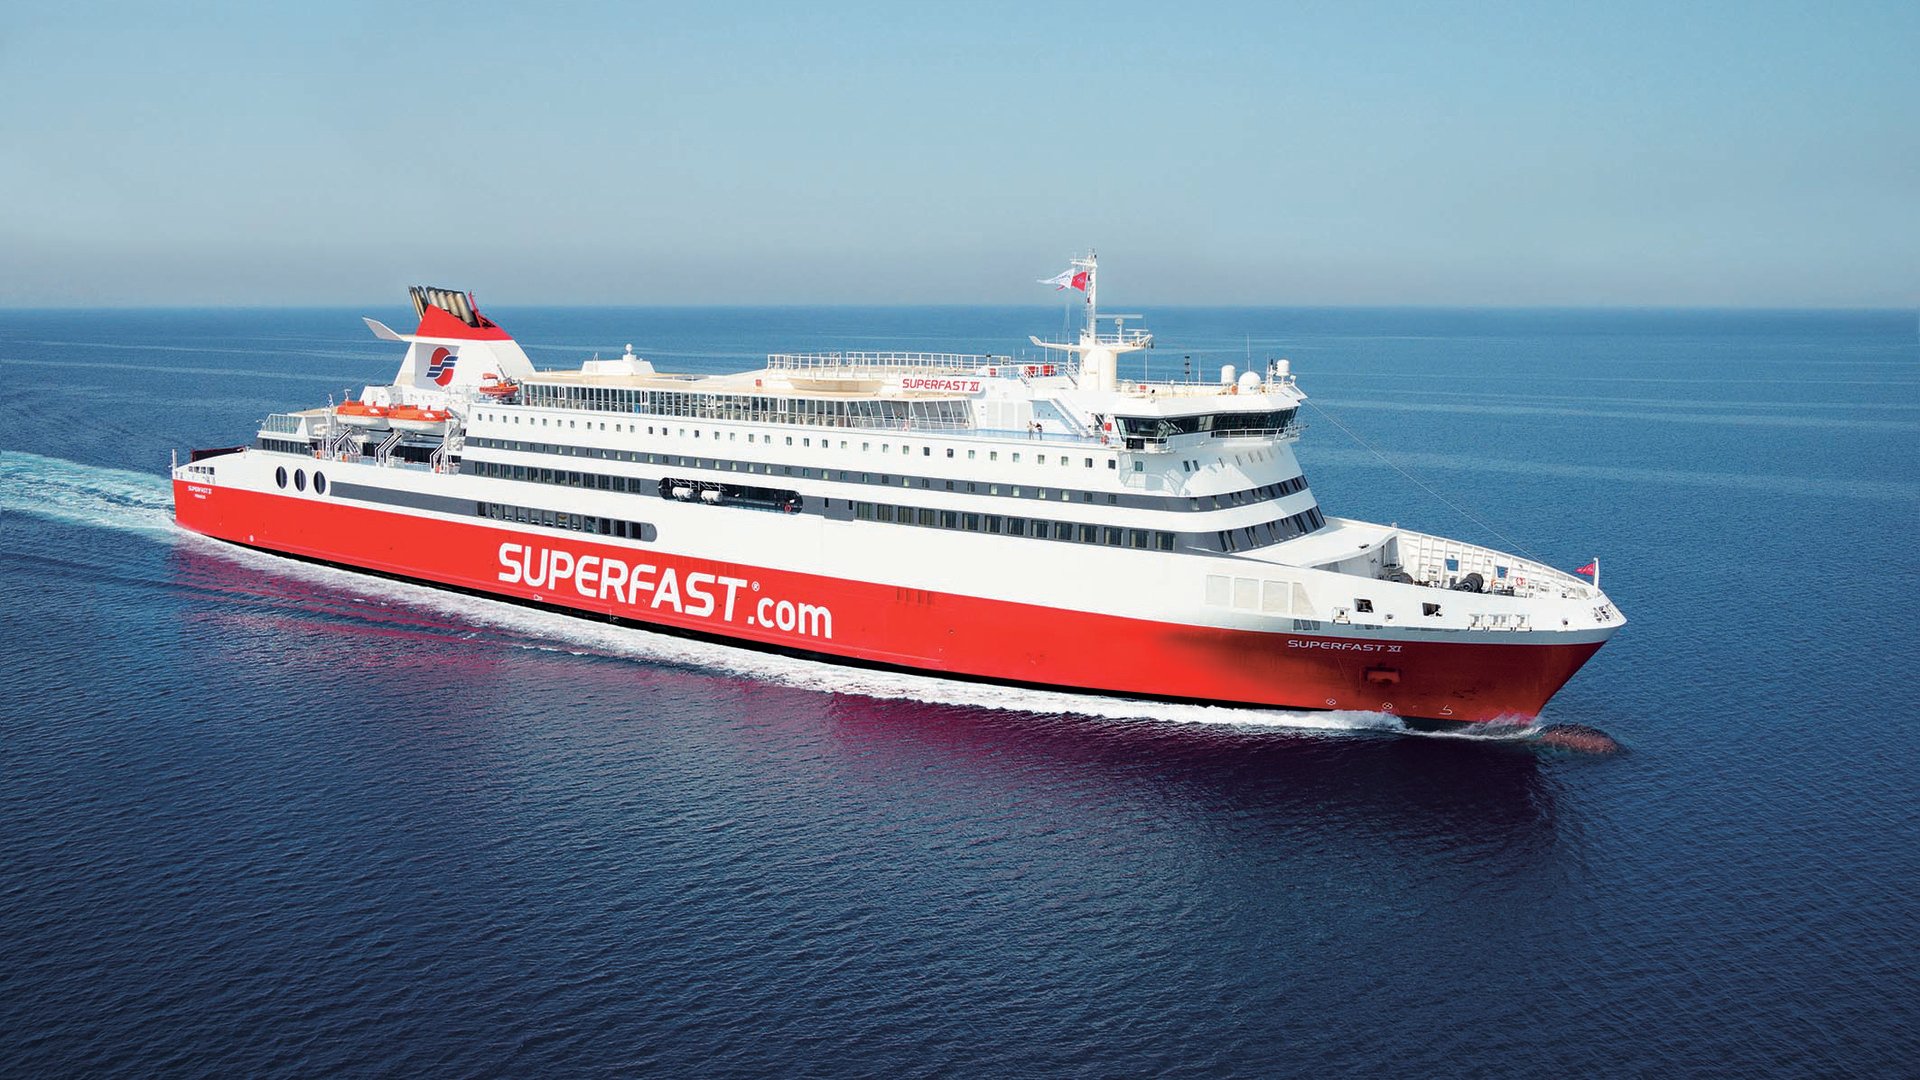 Attica Group Greece-Italy (Superfast Ferries in cooperation with ANEK LINES)